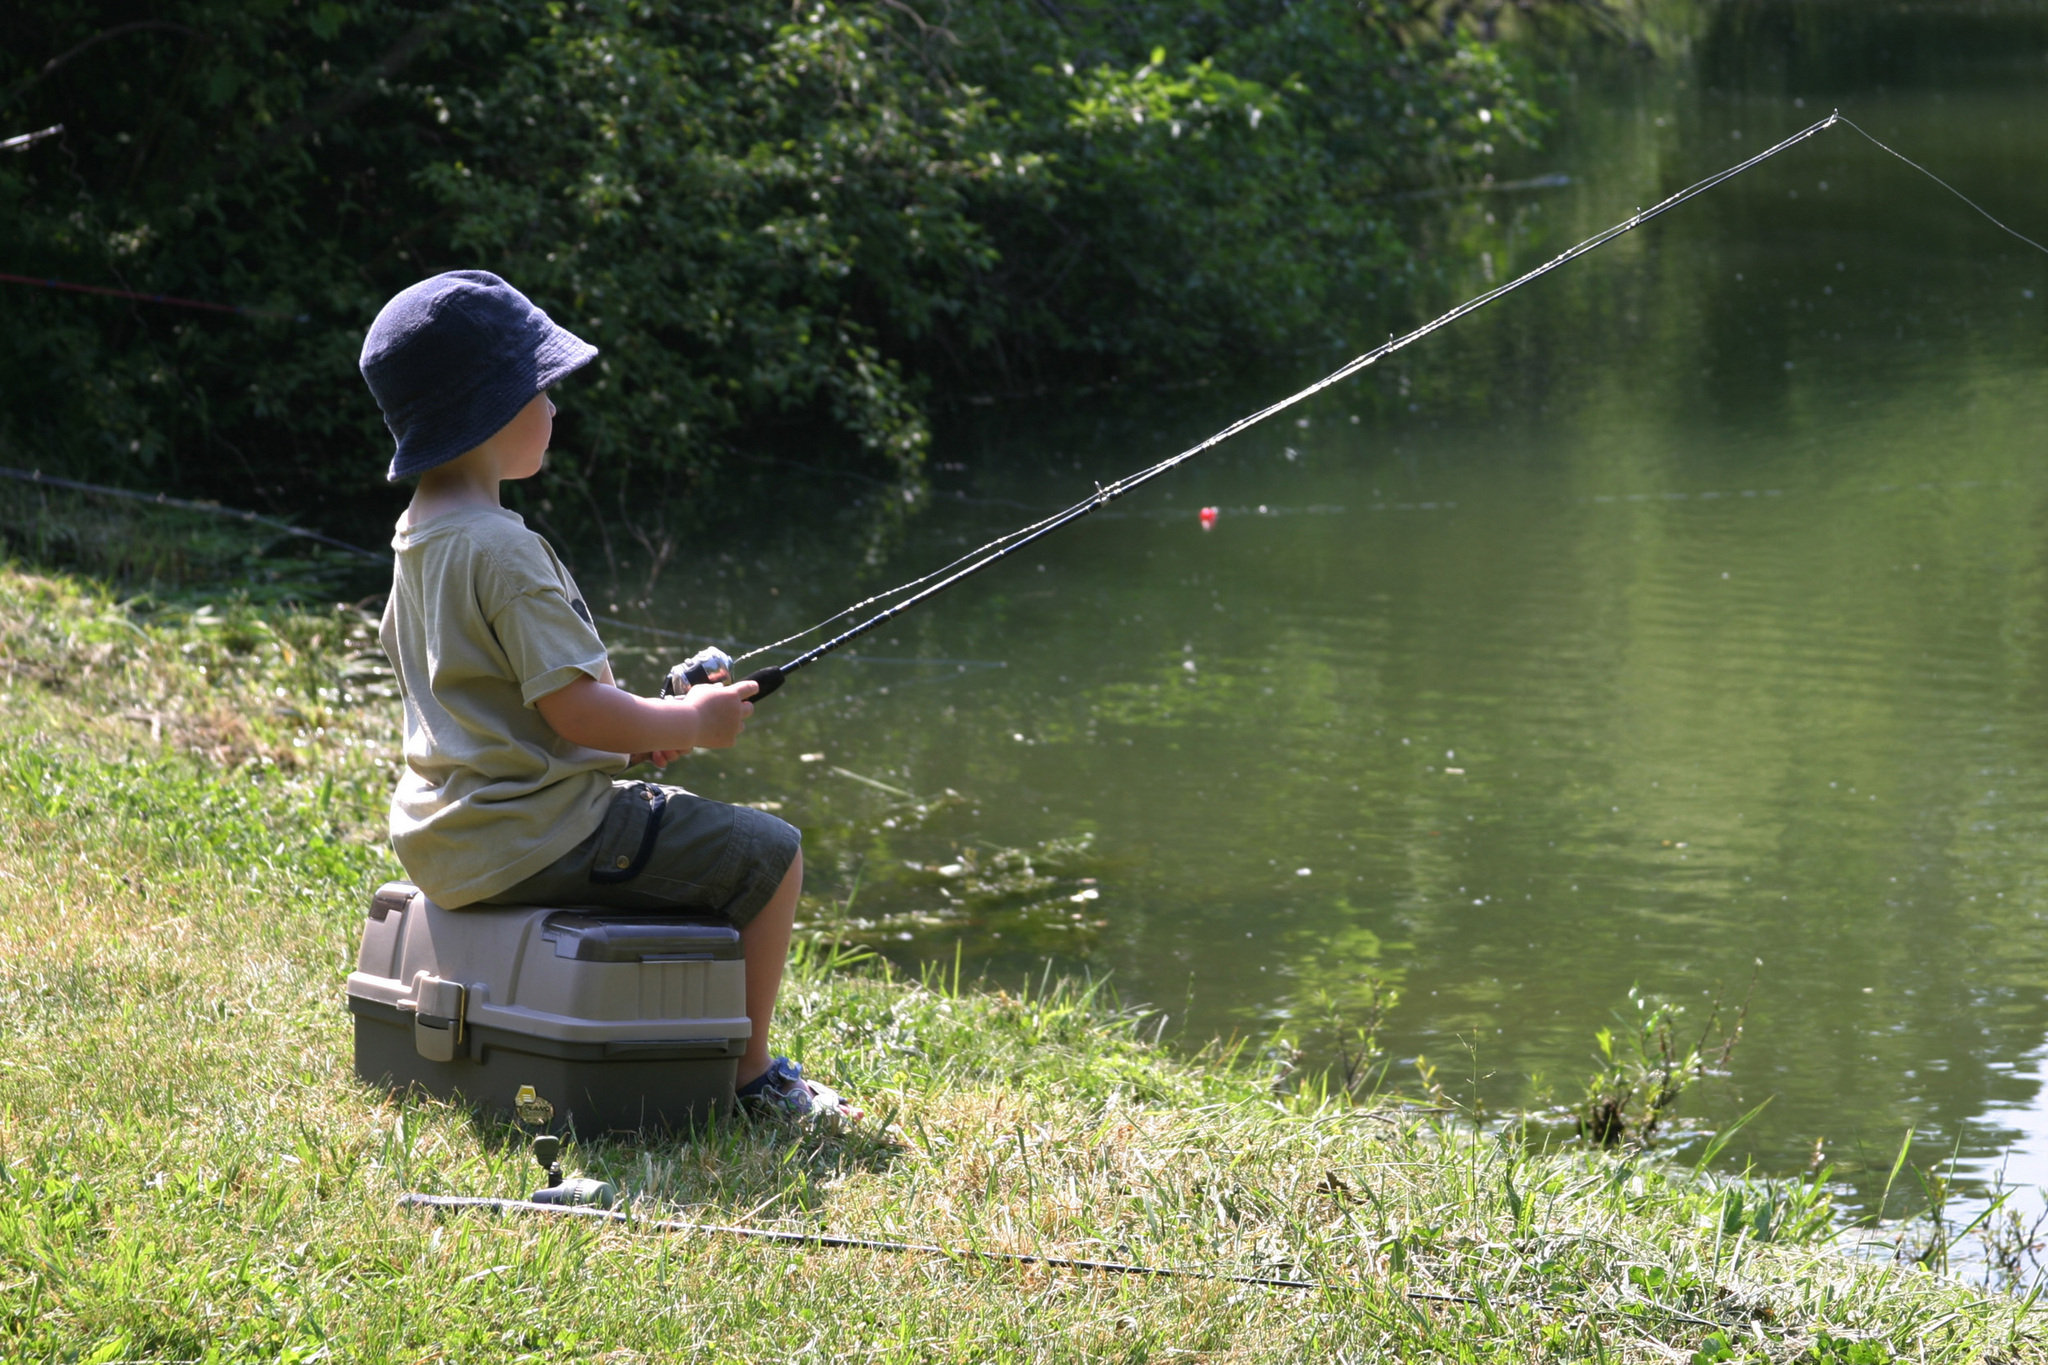 Small Parma pond a perfect spot for kid's fishing | cleveland.com